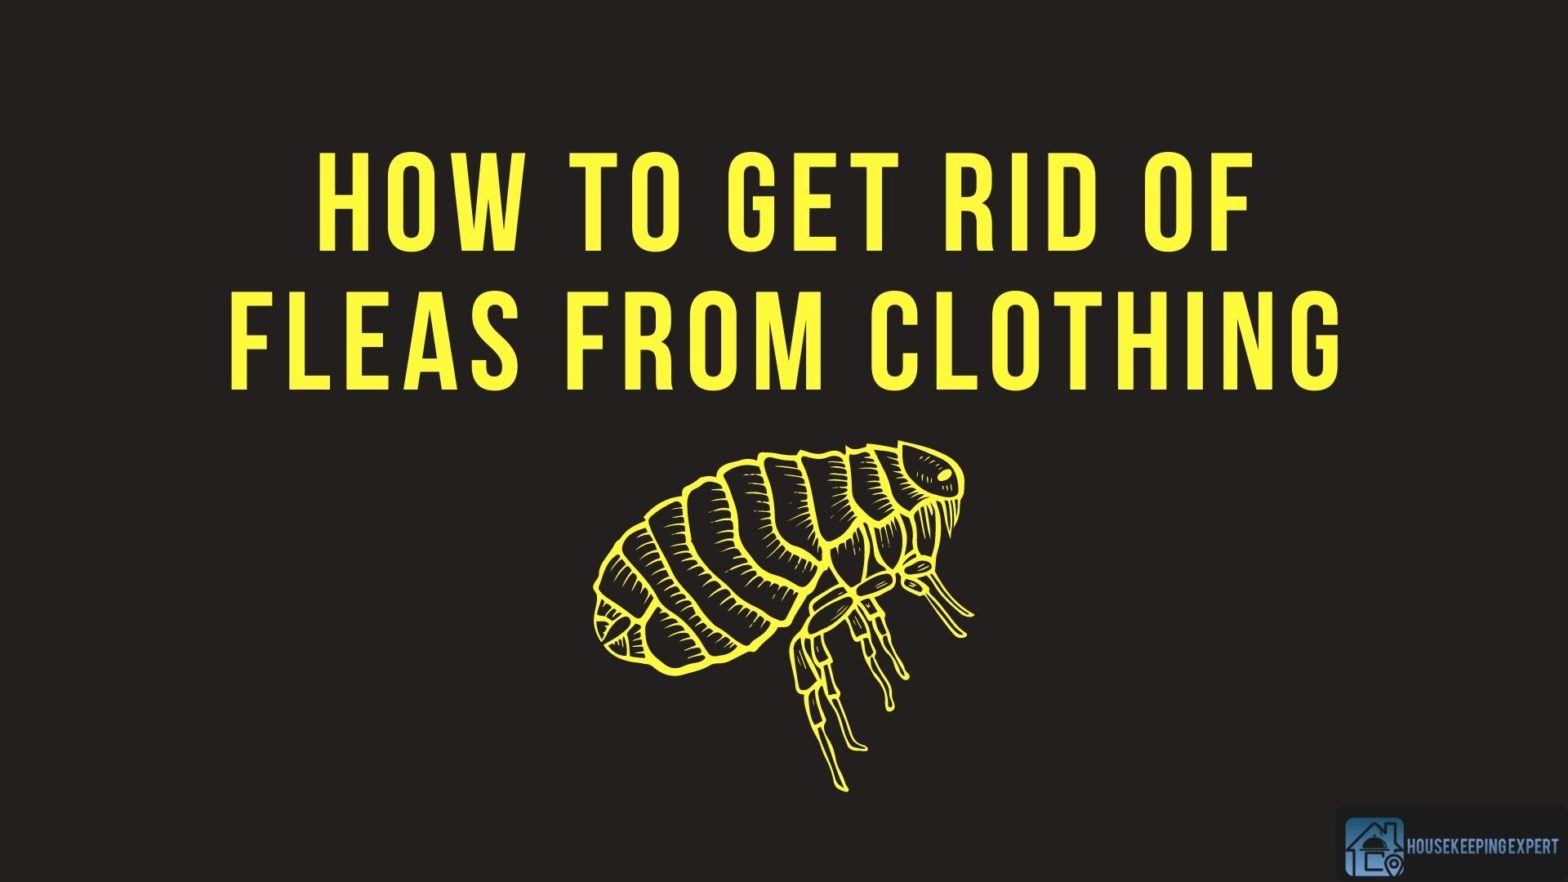 How To Get Rid Of Fleas From Clothing